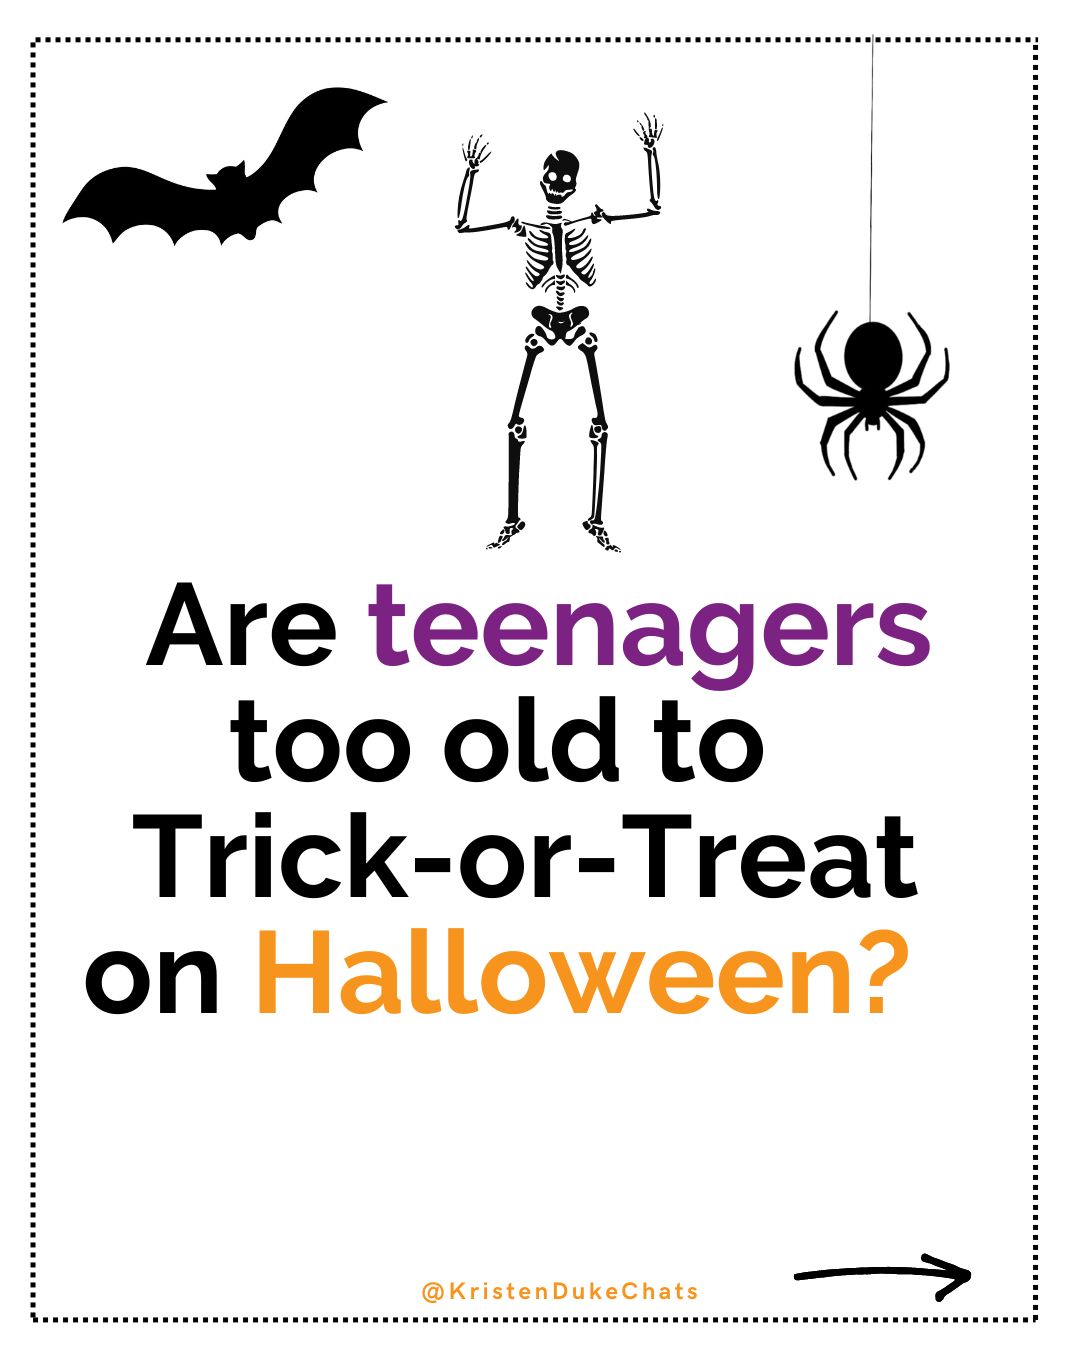 Are teenagers too old to trick or treat on Halloween?